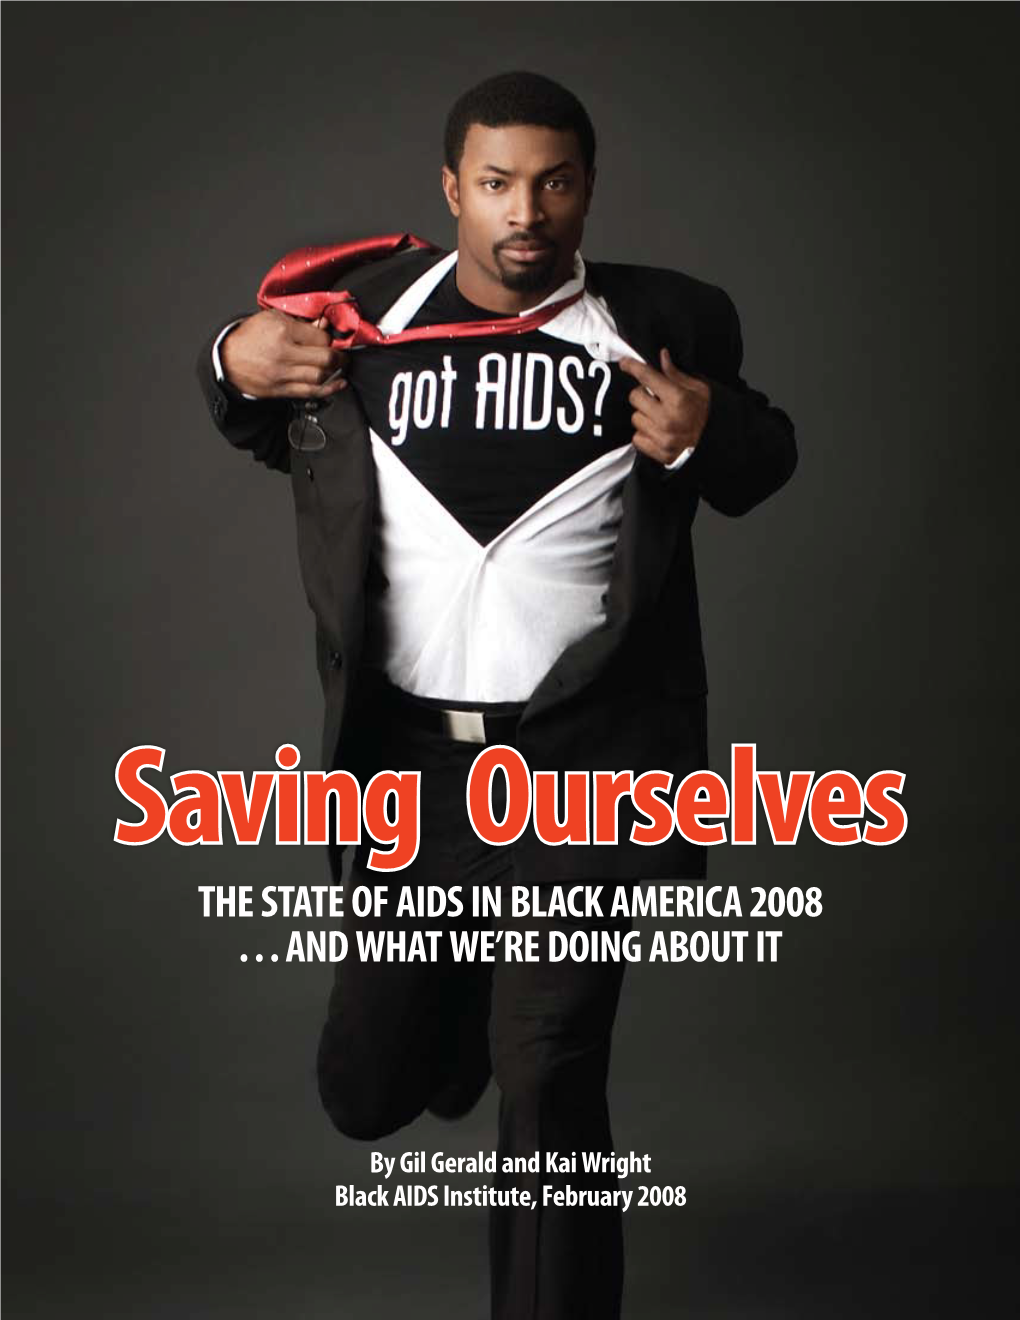 The State of Aids in Black America 2008 ...And What We